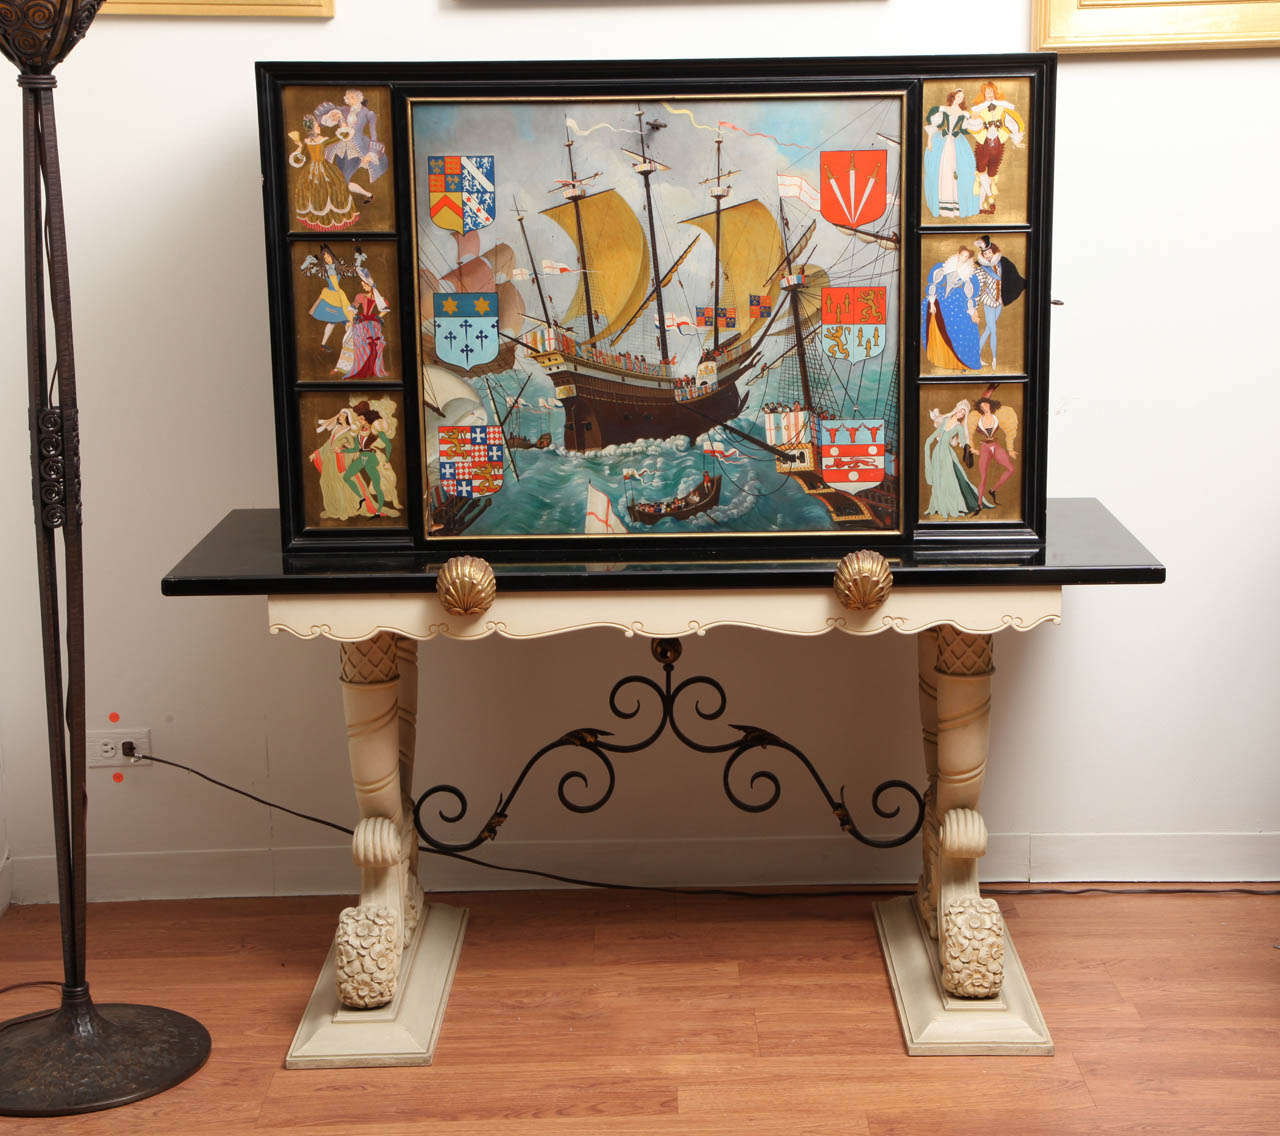 1940s bar cabinet in Renaissance Revival style, with polychrome hand-painted decoration on black lacquered wood, depicting a naval scene with coat of arms symbols and the corresponding ladies and knights dressed in different styles of fashion. The